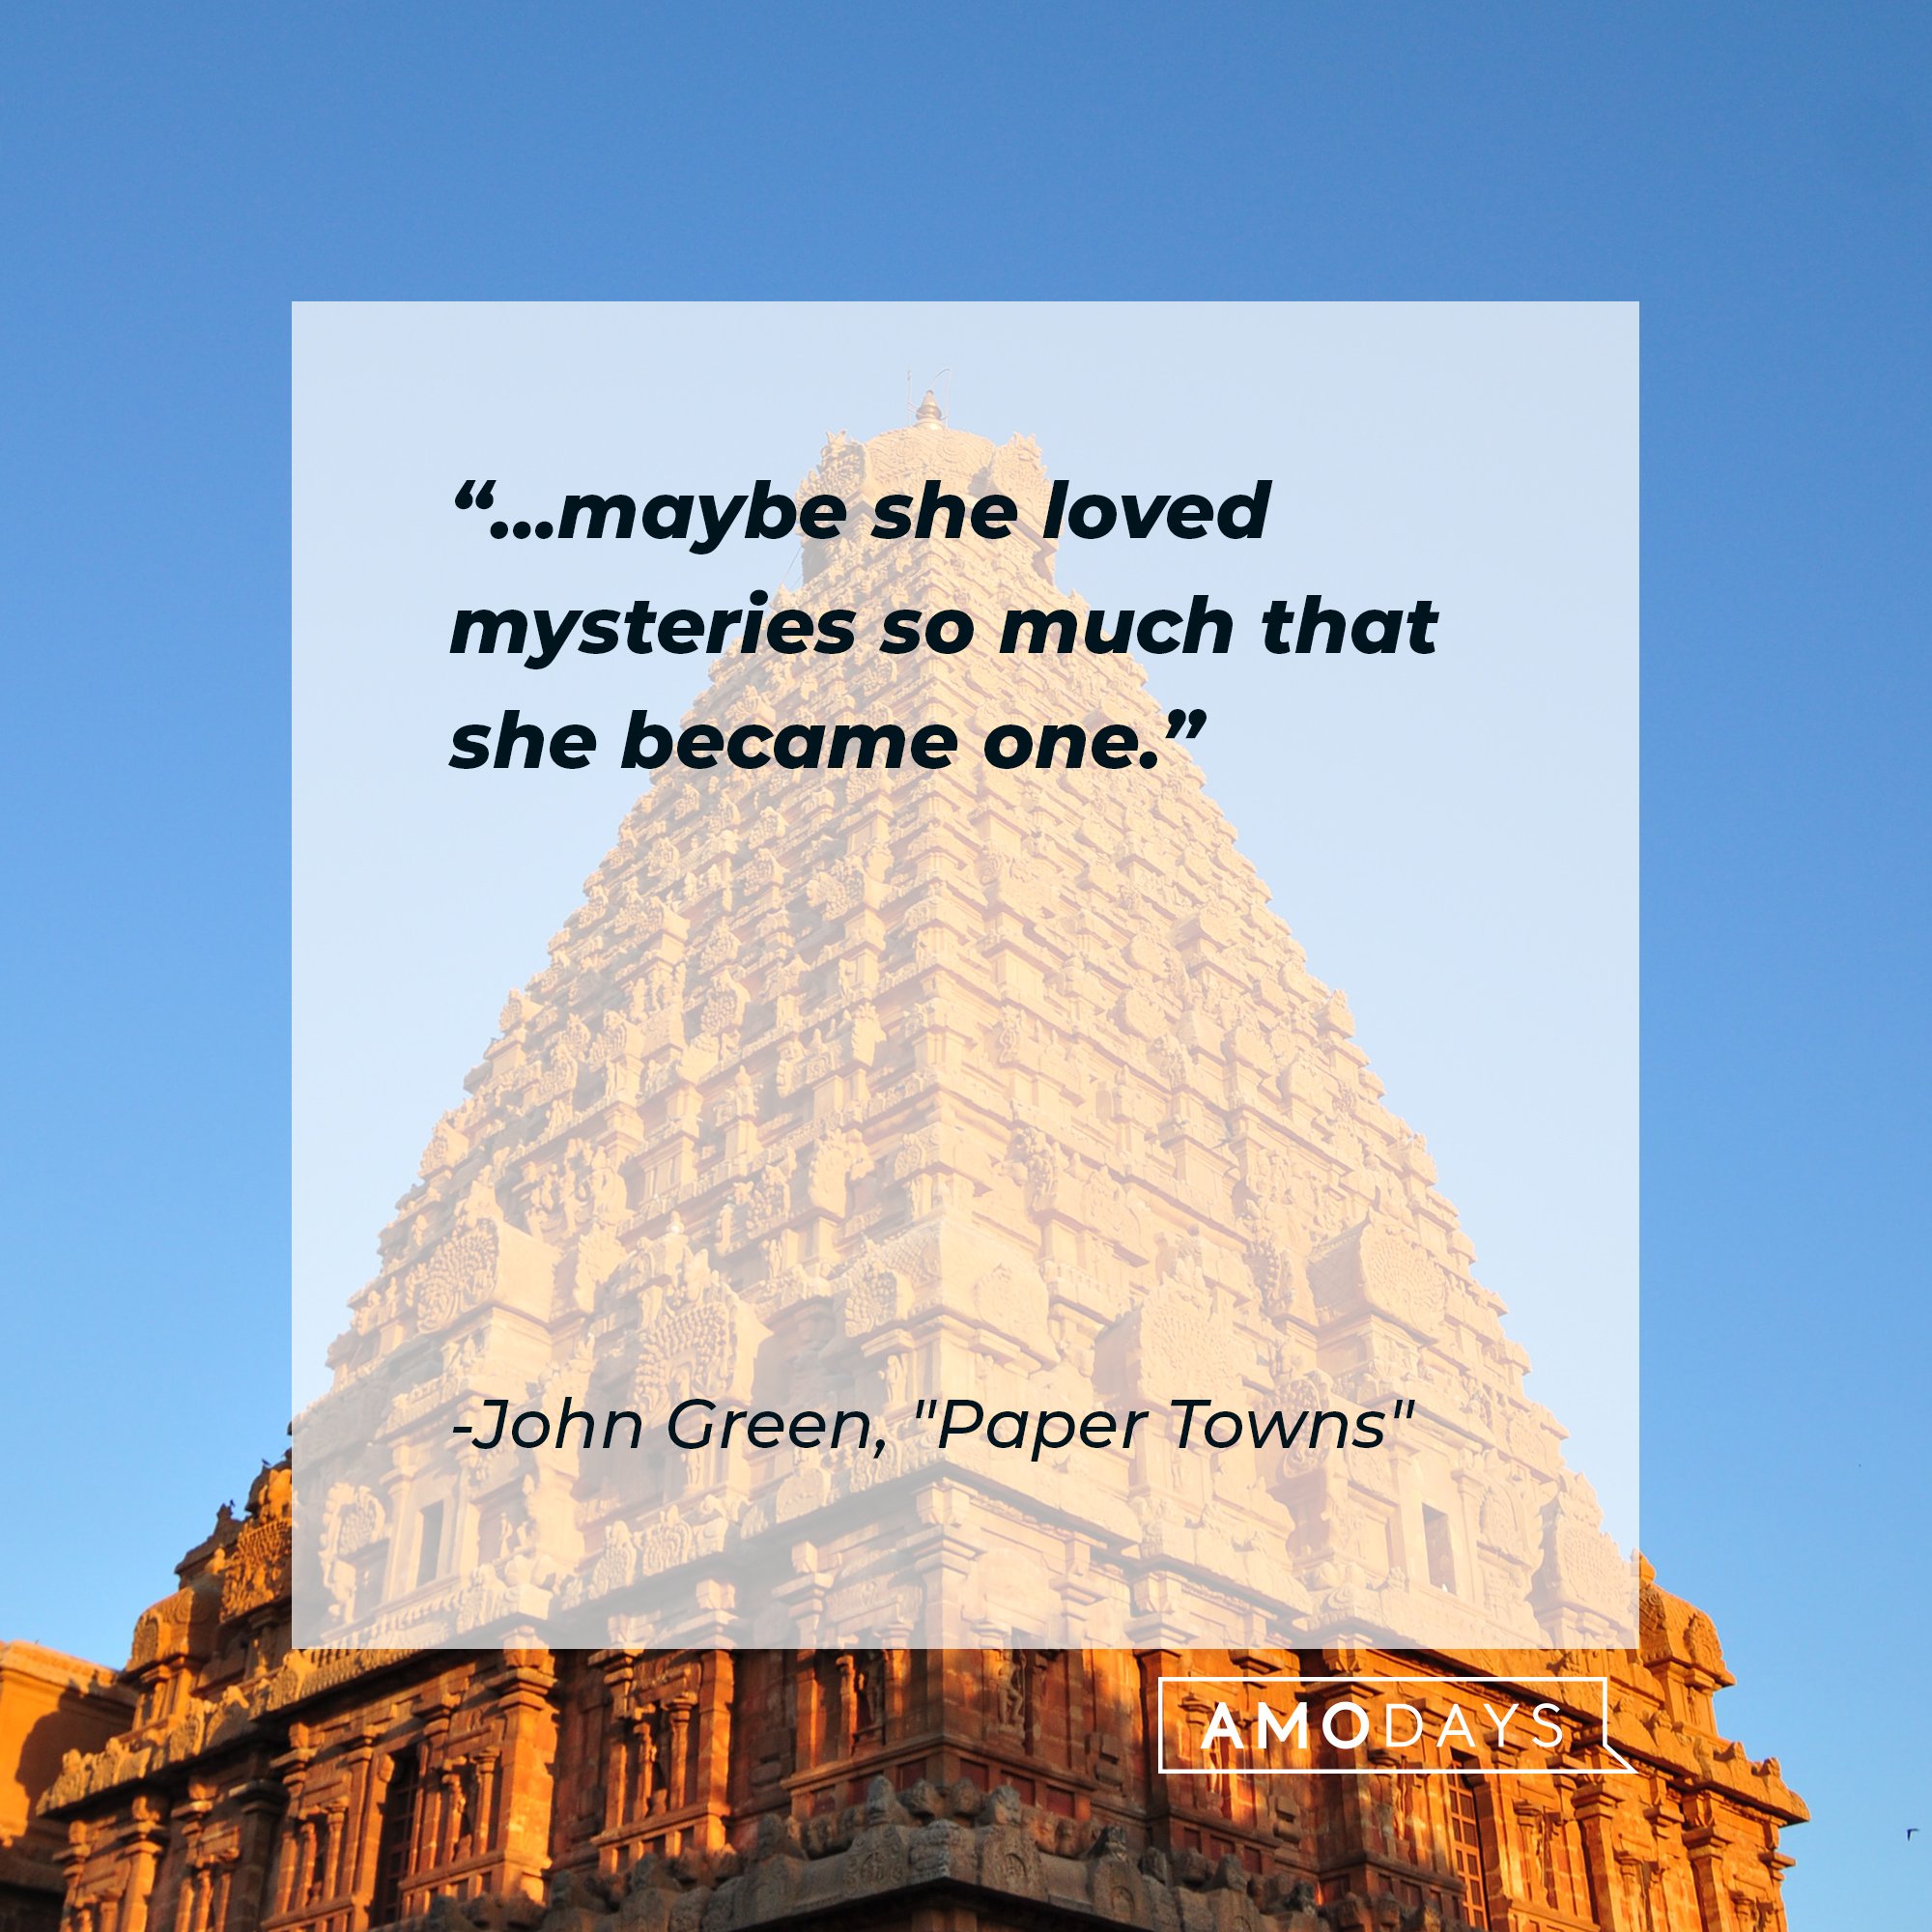 John Green's quote from “Paper Towns": "…maybe she loved mysteries so much that she became one." | Image: AmoDays